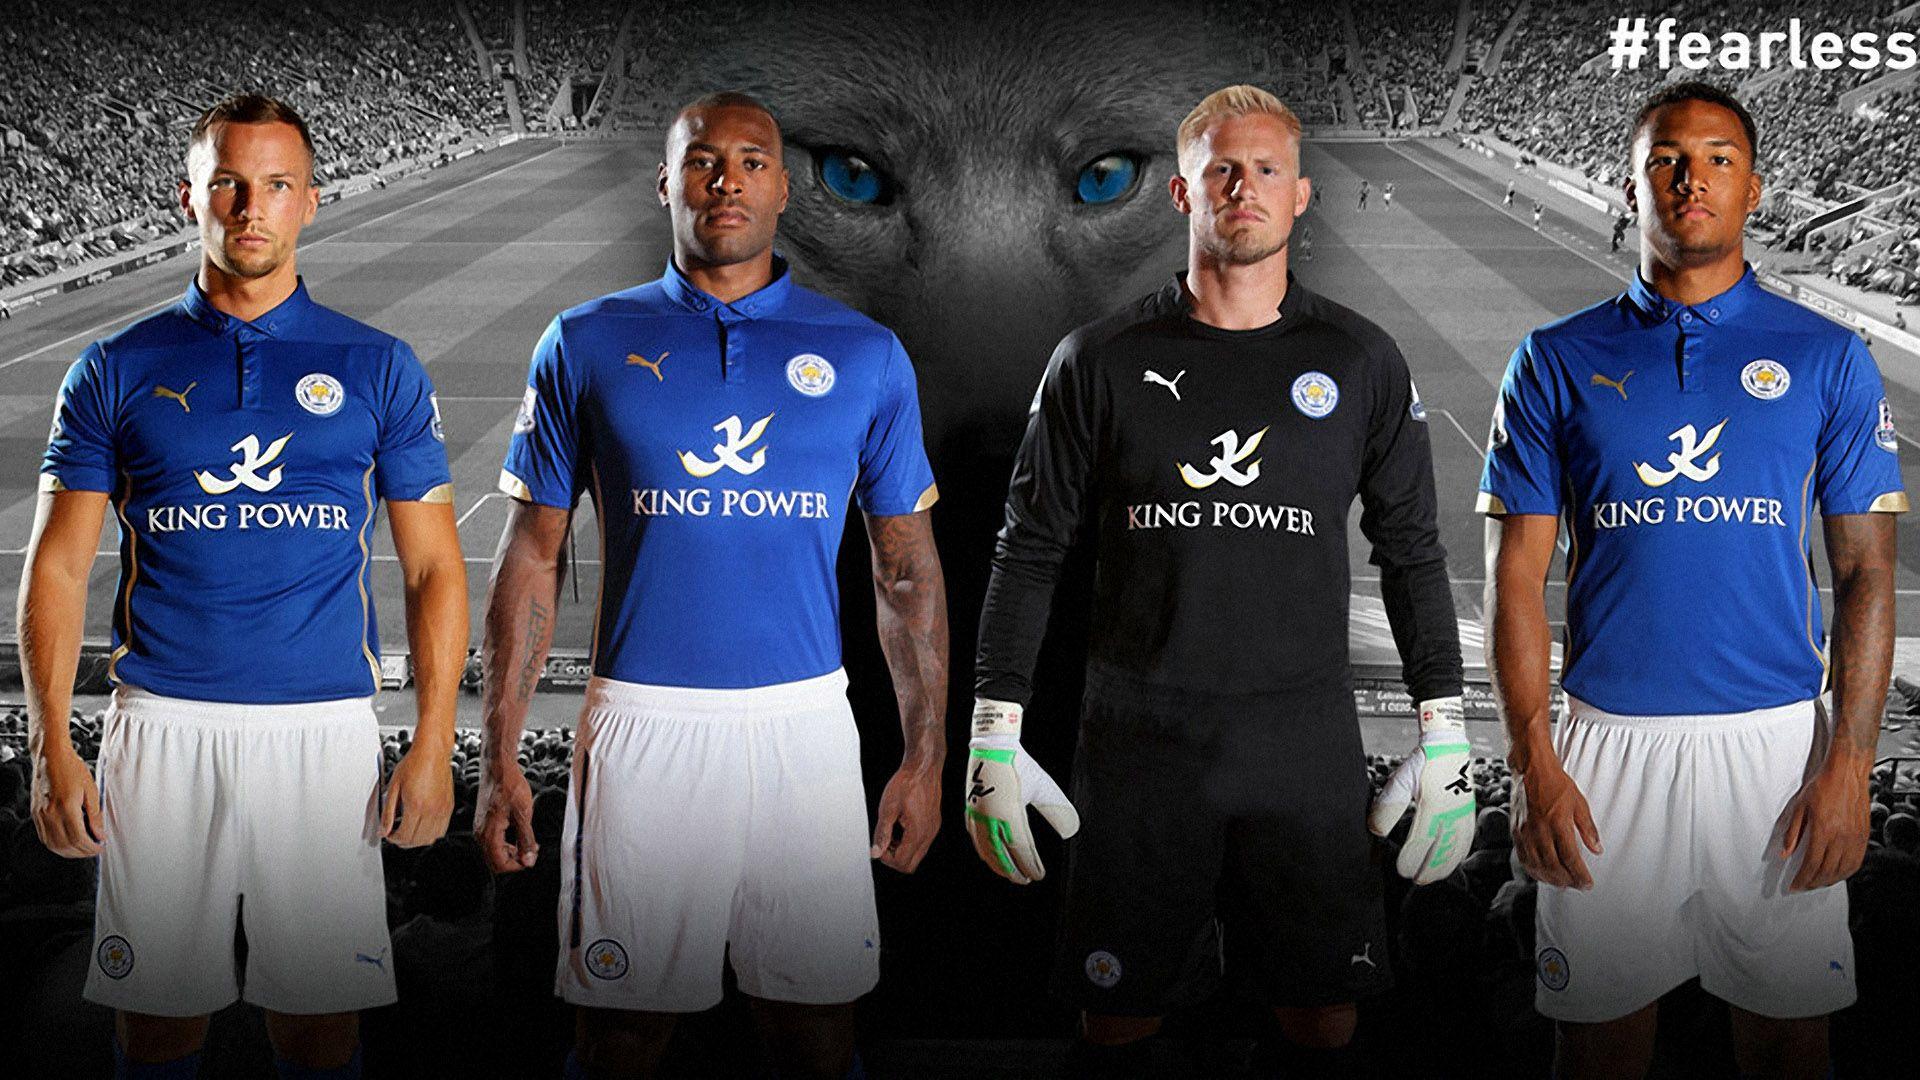 Leicester City FC Wallpaper and Background #LeicesterCityFC